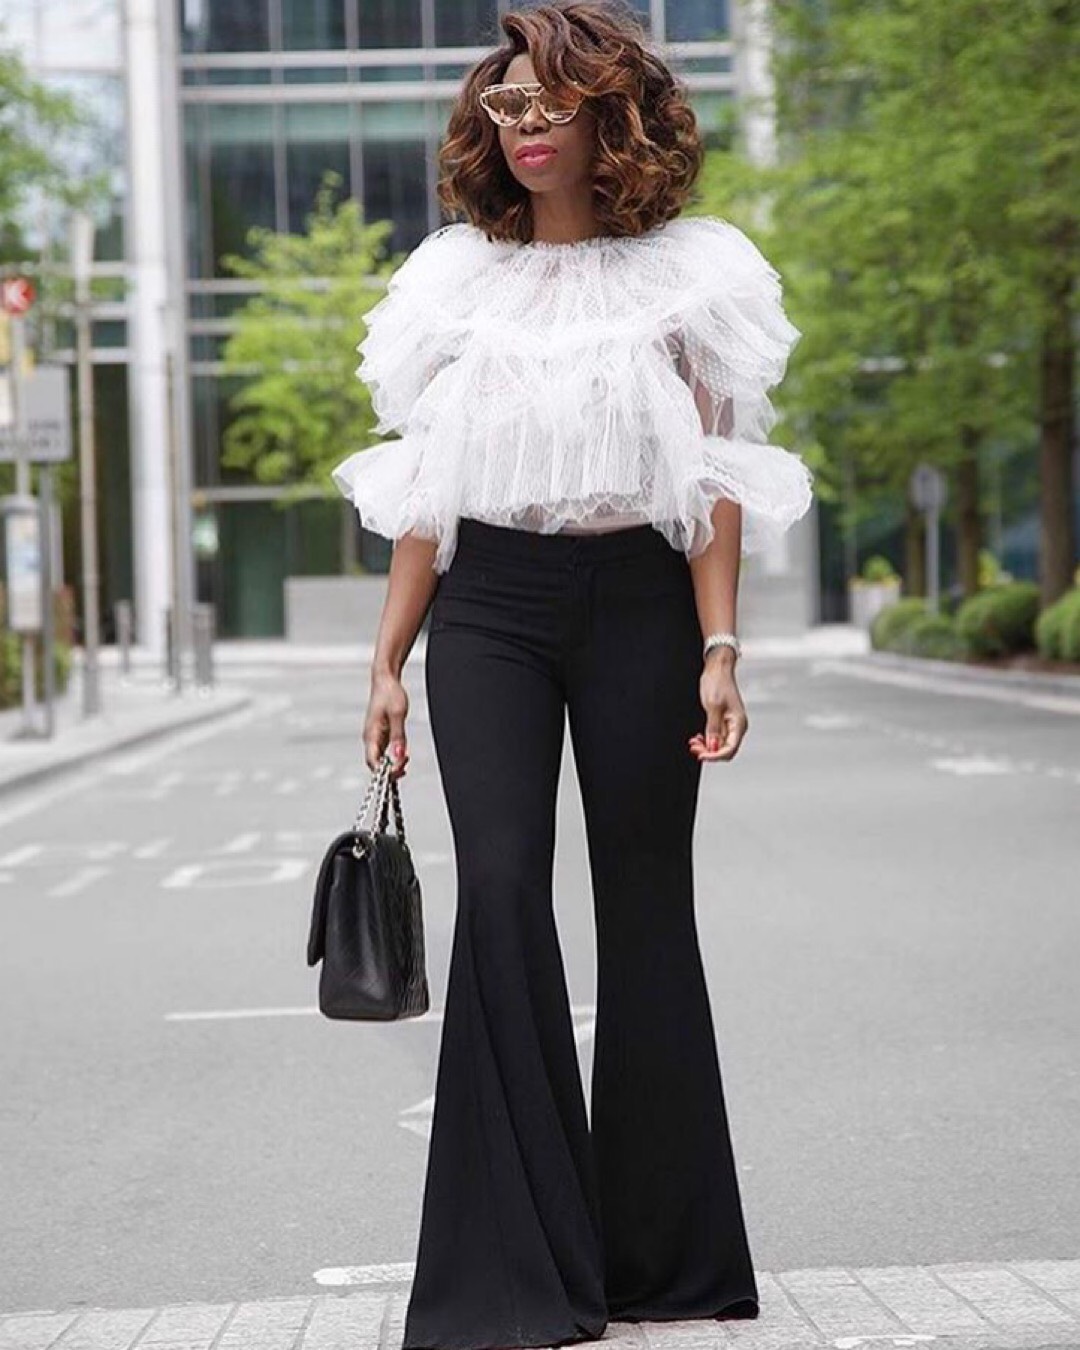 Fashion Bombshell of the Day: Sade from London – Fashion Bomb Daily